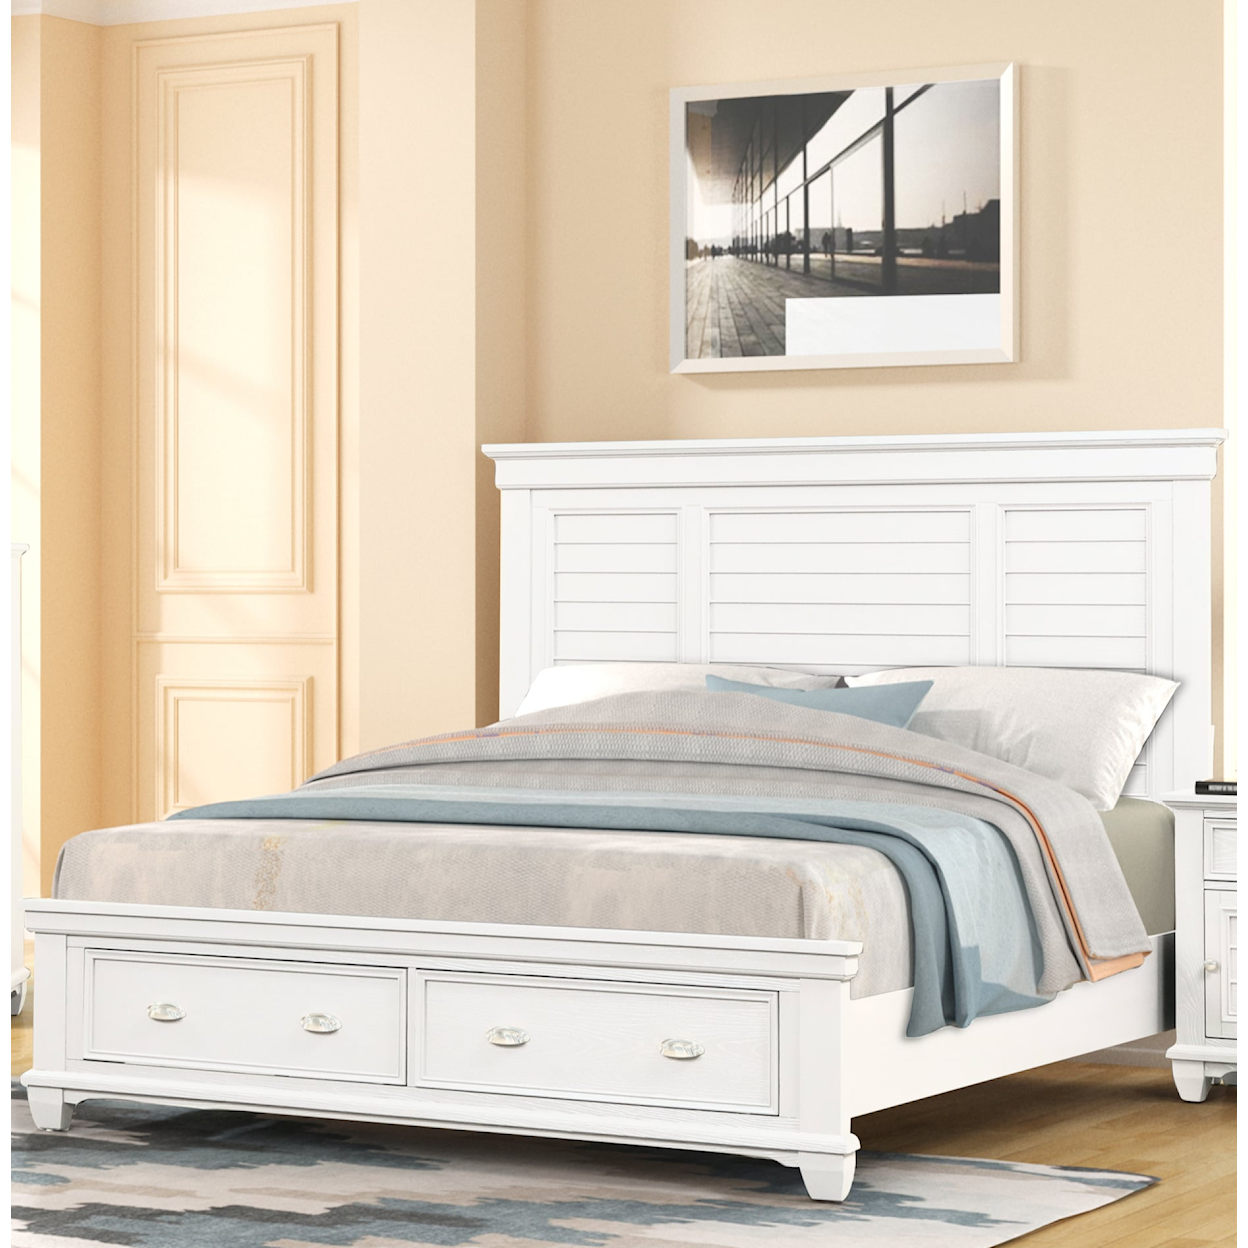 New Classic Jamestown King Panel Storage Bed